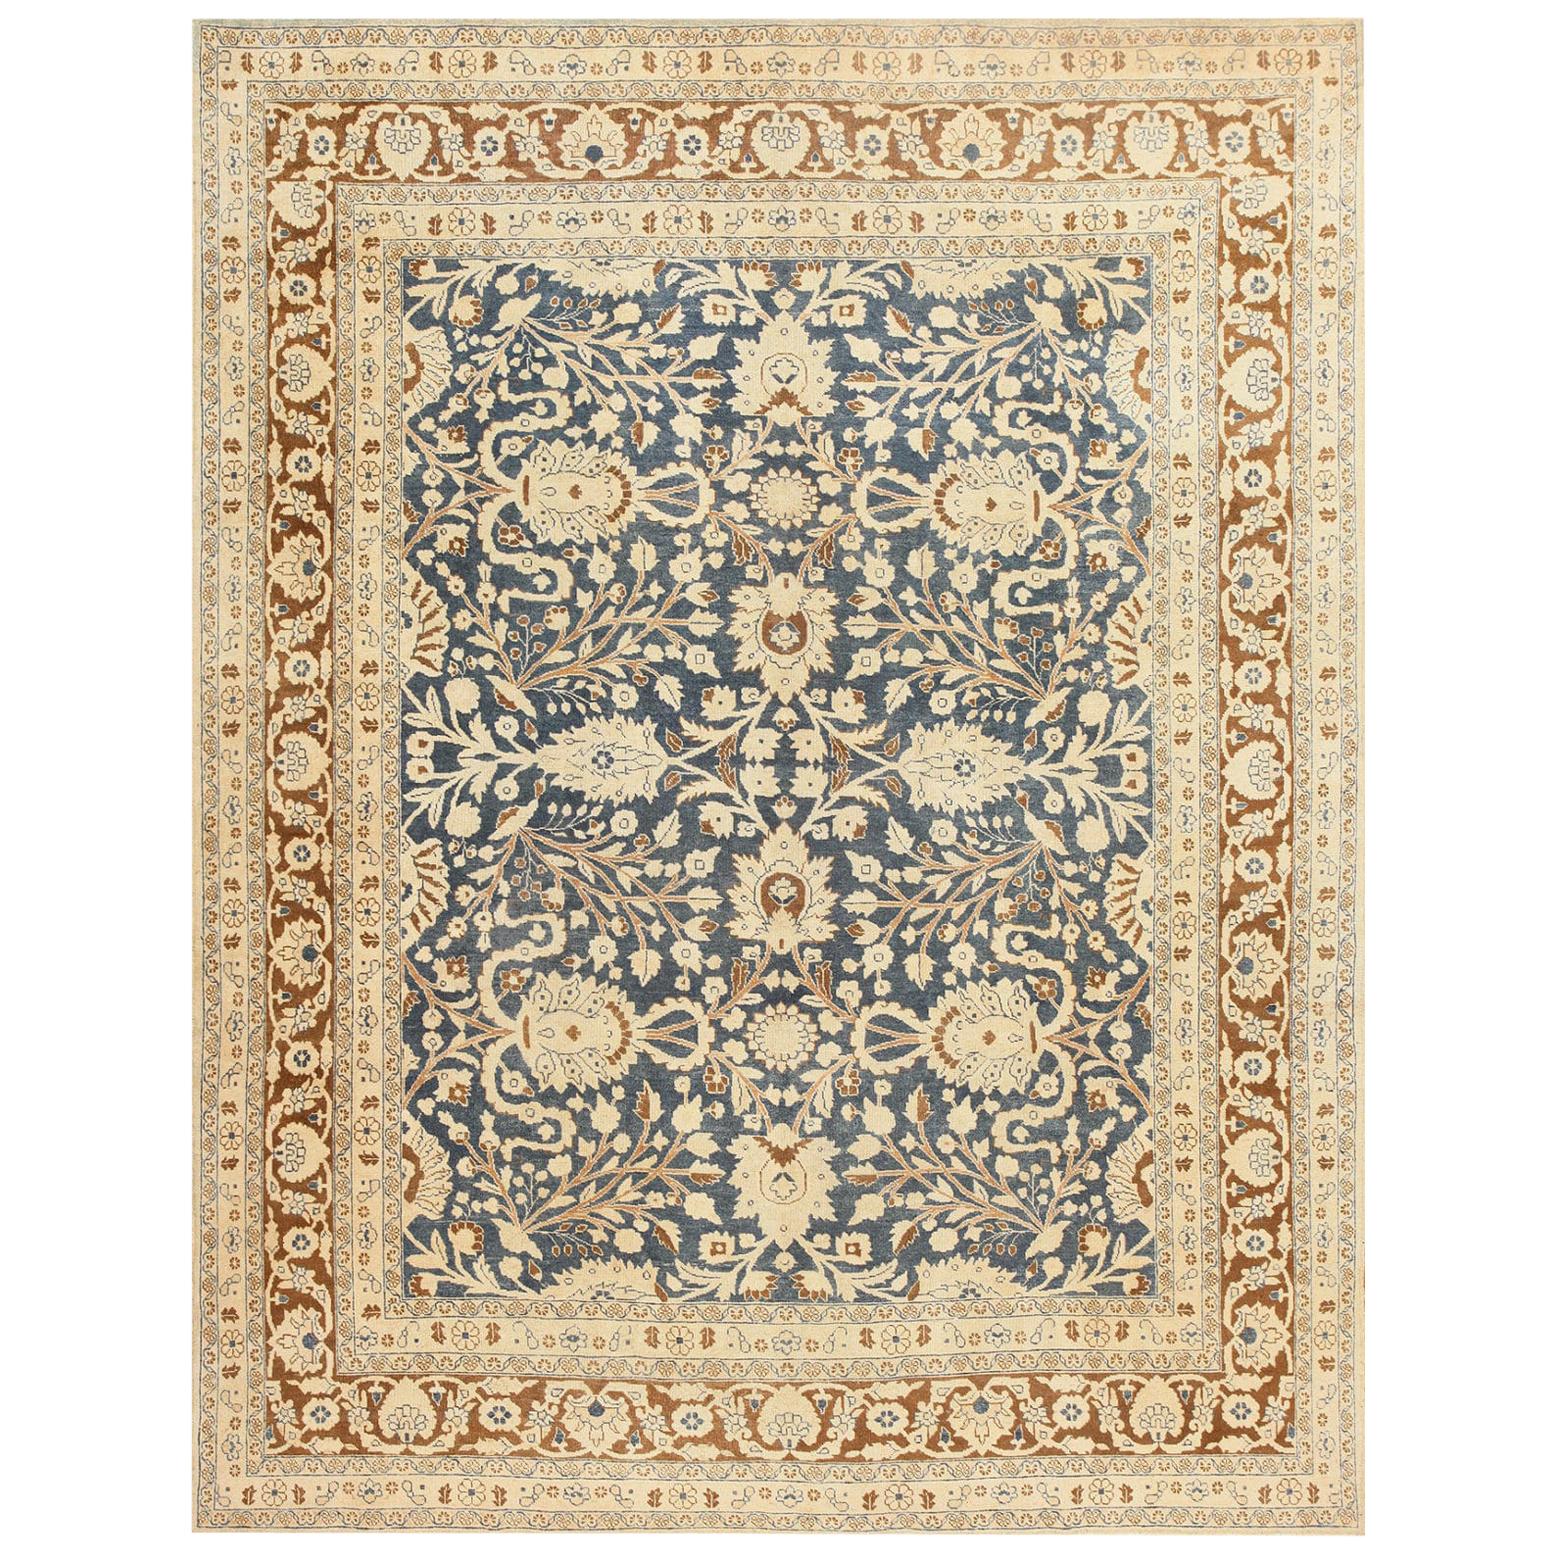 Nazmiyal Collection Antique Persian Khorassan Rug. Size: 8 ft 8 in x 10 ft 10 in